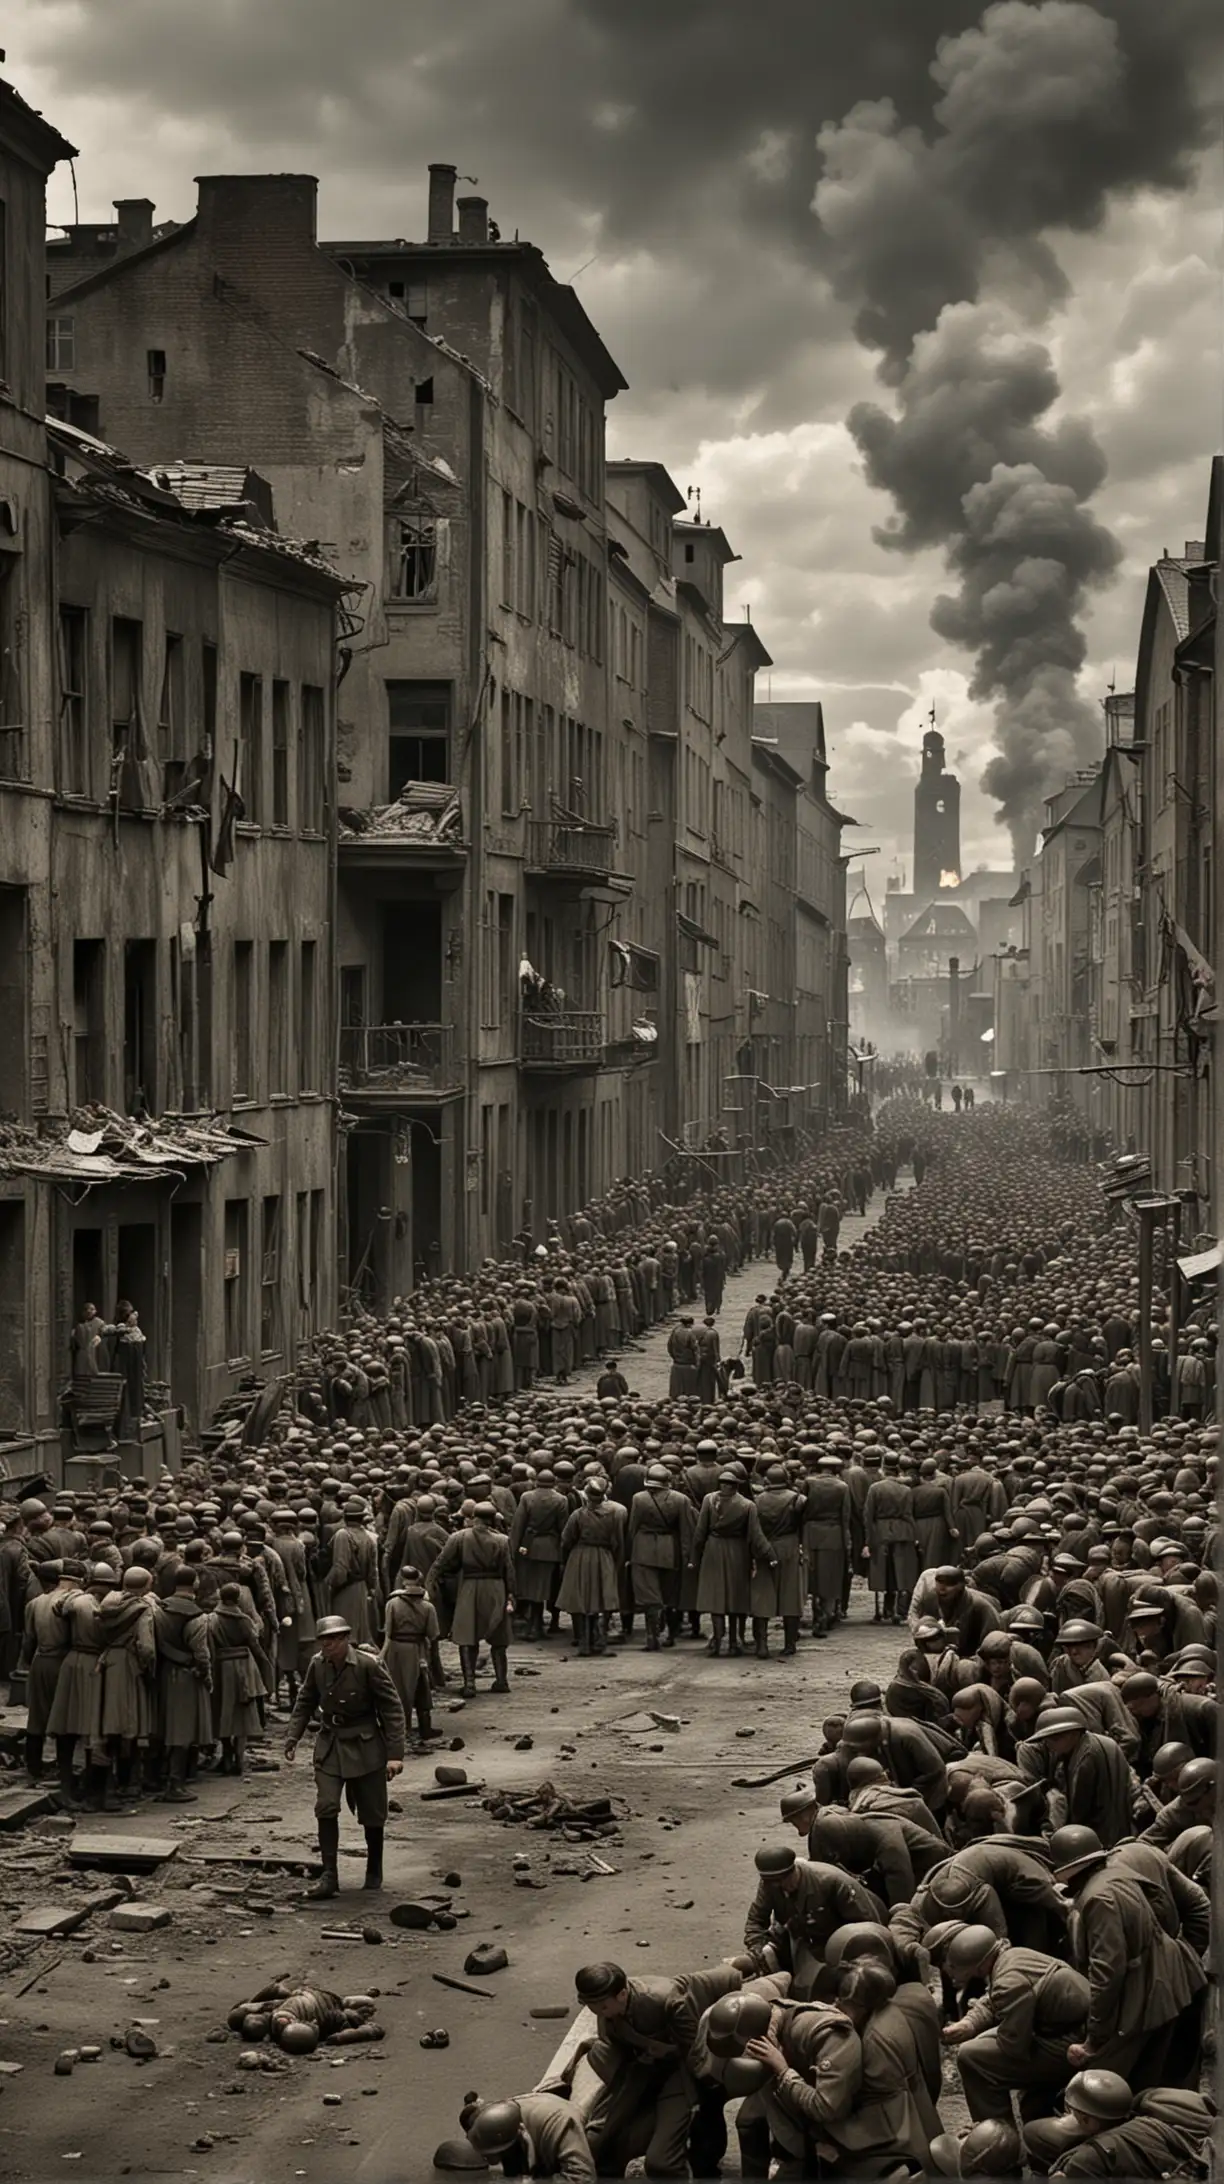 Create a historically accurate and respectful image that depicts a scene from Nazi Germany during World War II. The image should focus on conveying the gravity and impact of the era, such as a war-torn city, a solemn moment of remembrance, or a depiction of resistance against the Nazi regime. Ensure the image is educational and commemorates the victims and hardships faced during this period.